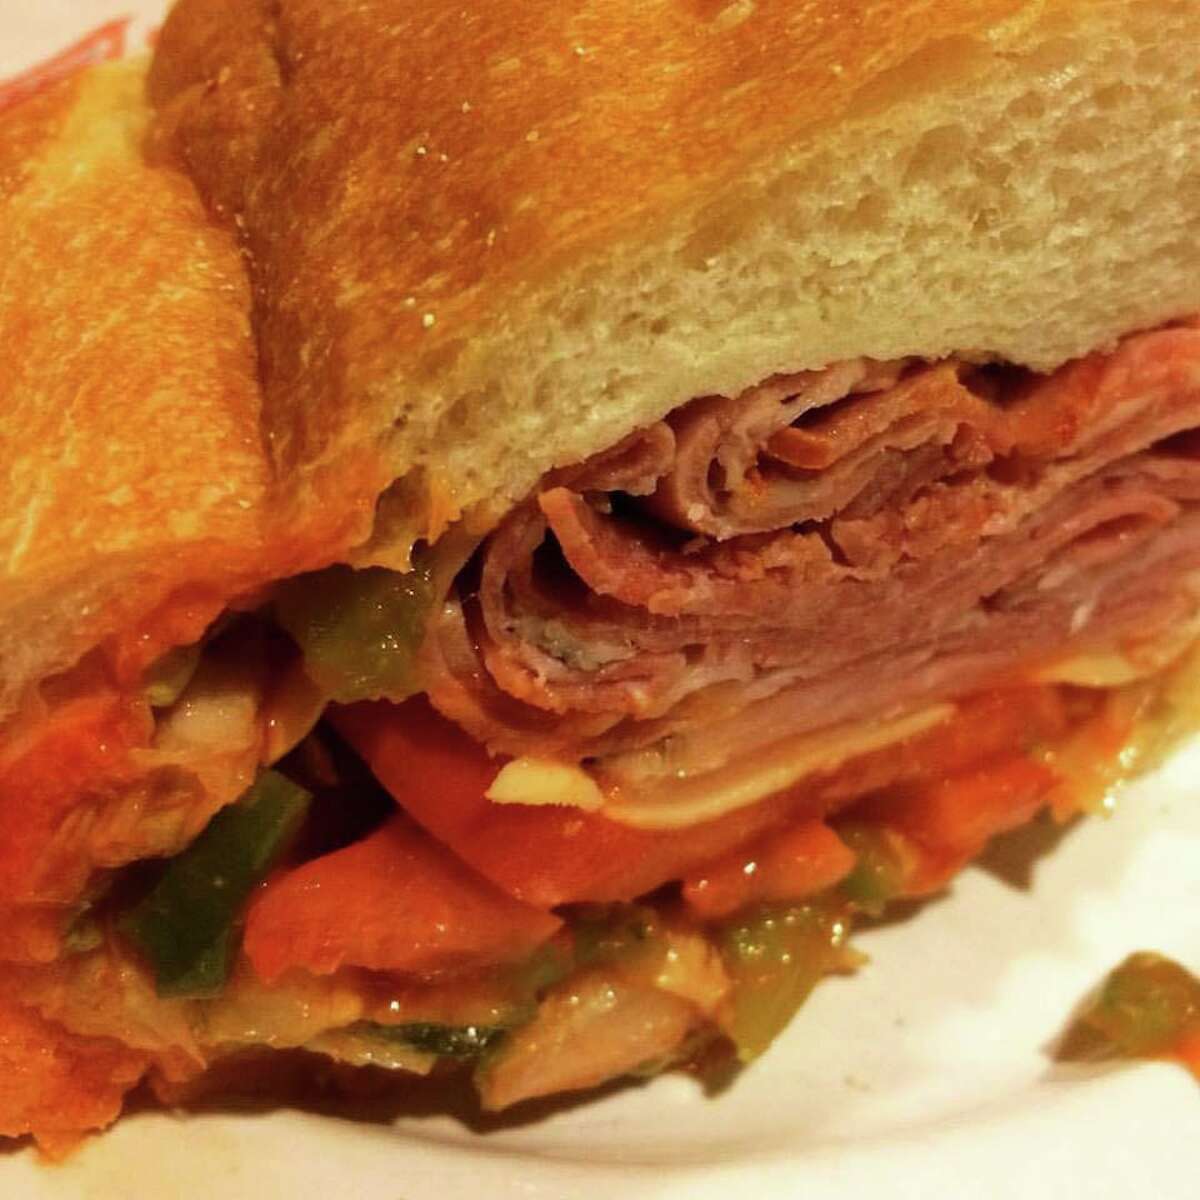 A sandwich from Nardelli's Grinder Shoppe.